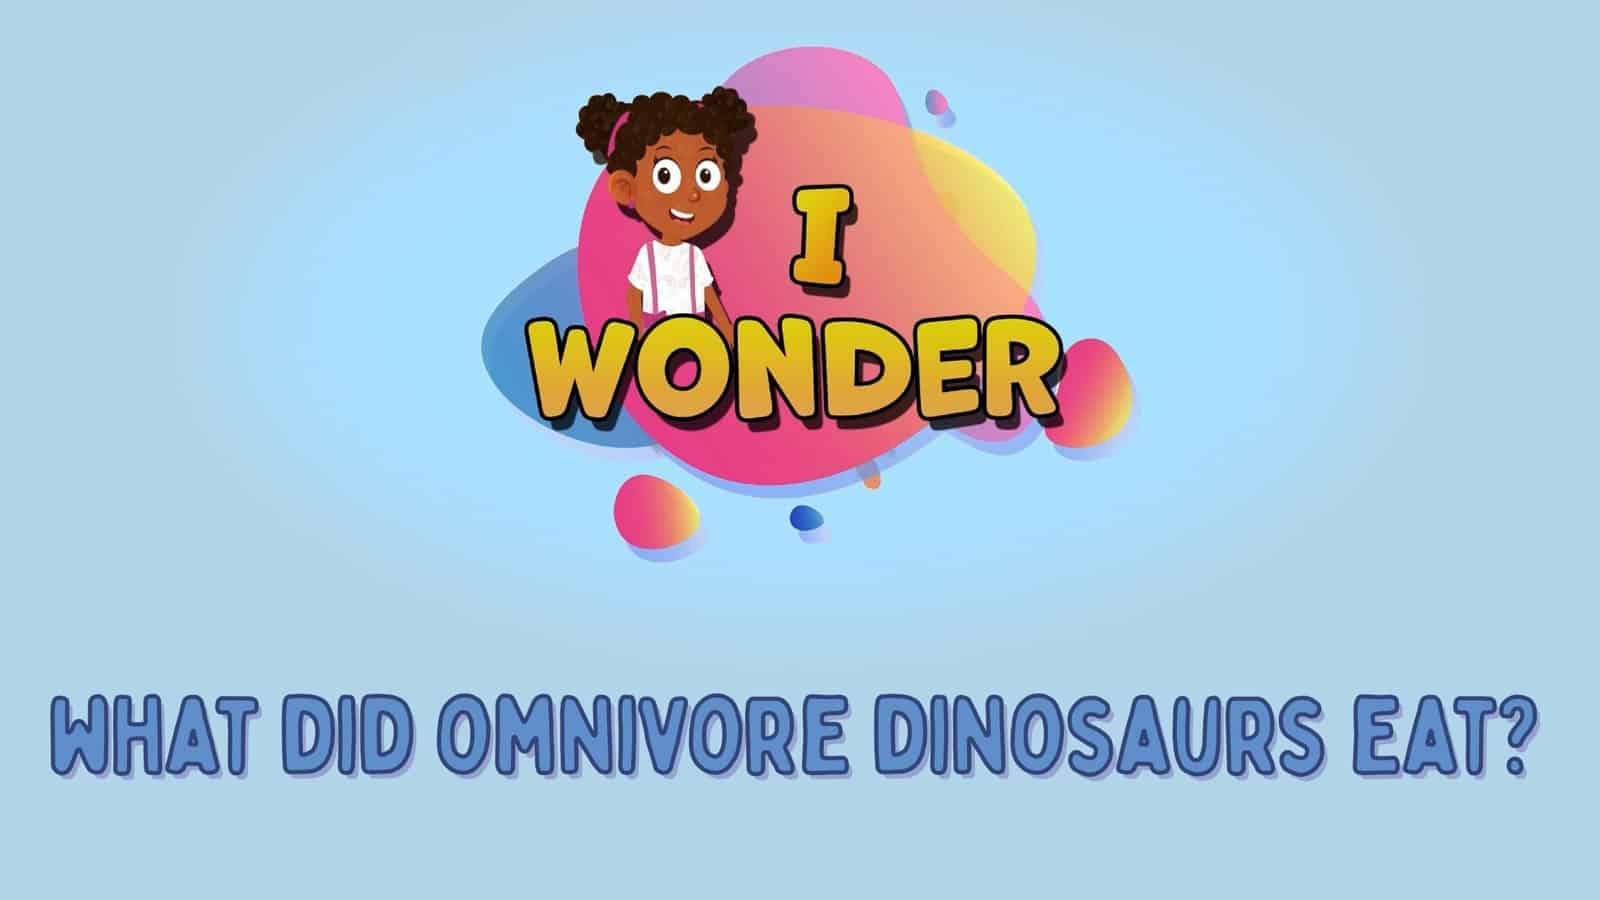 What Did Omnivore Dinosaurs Eat?